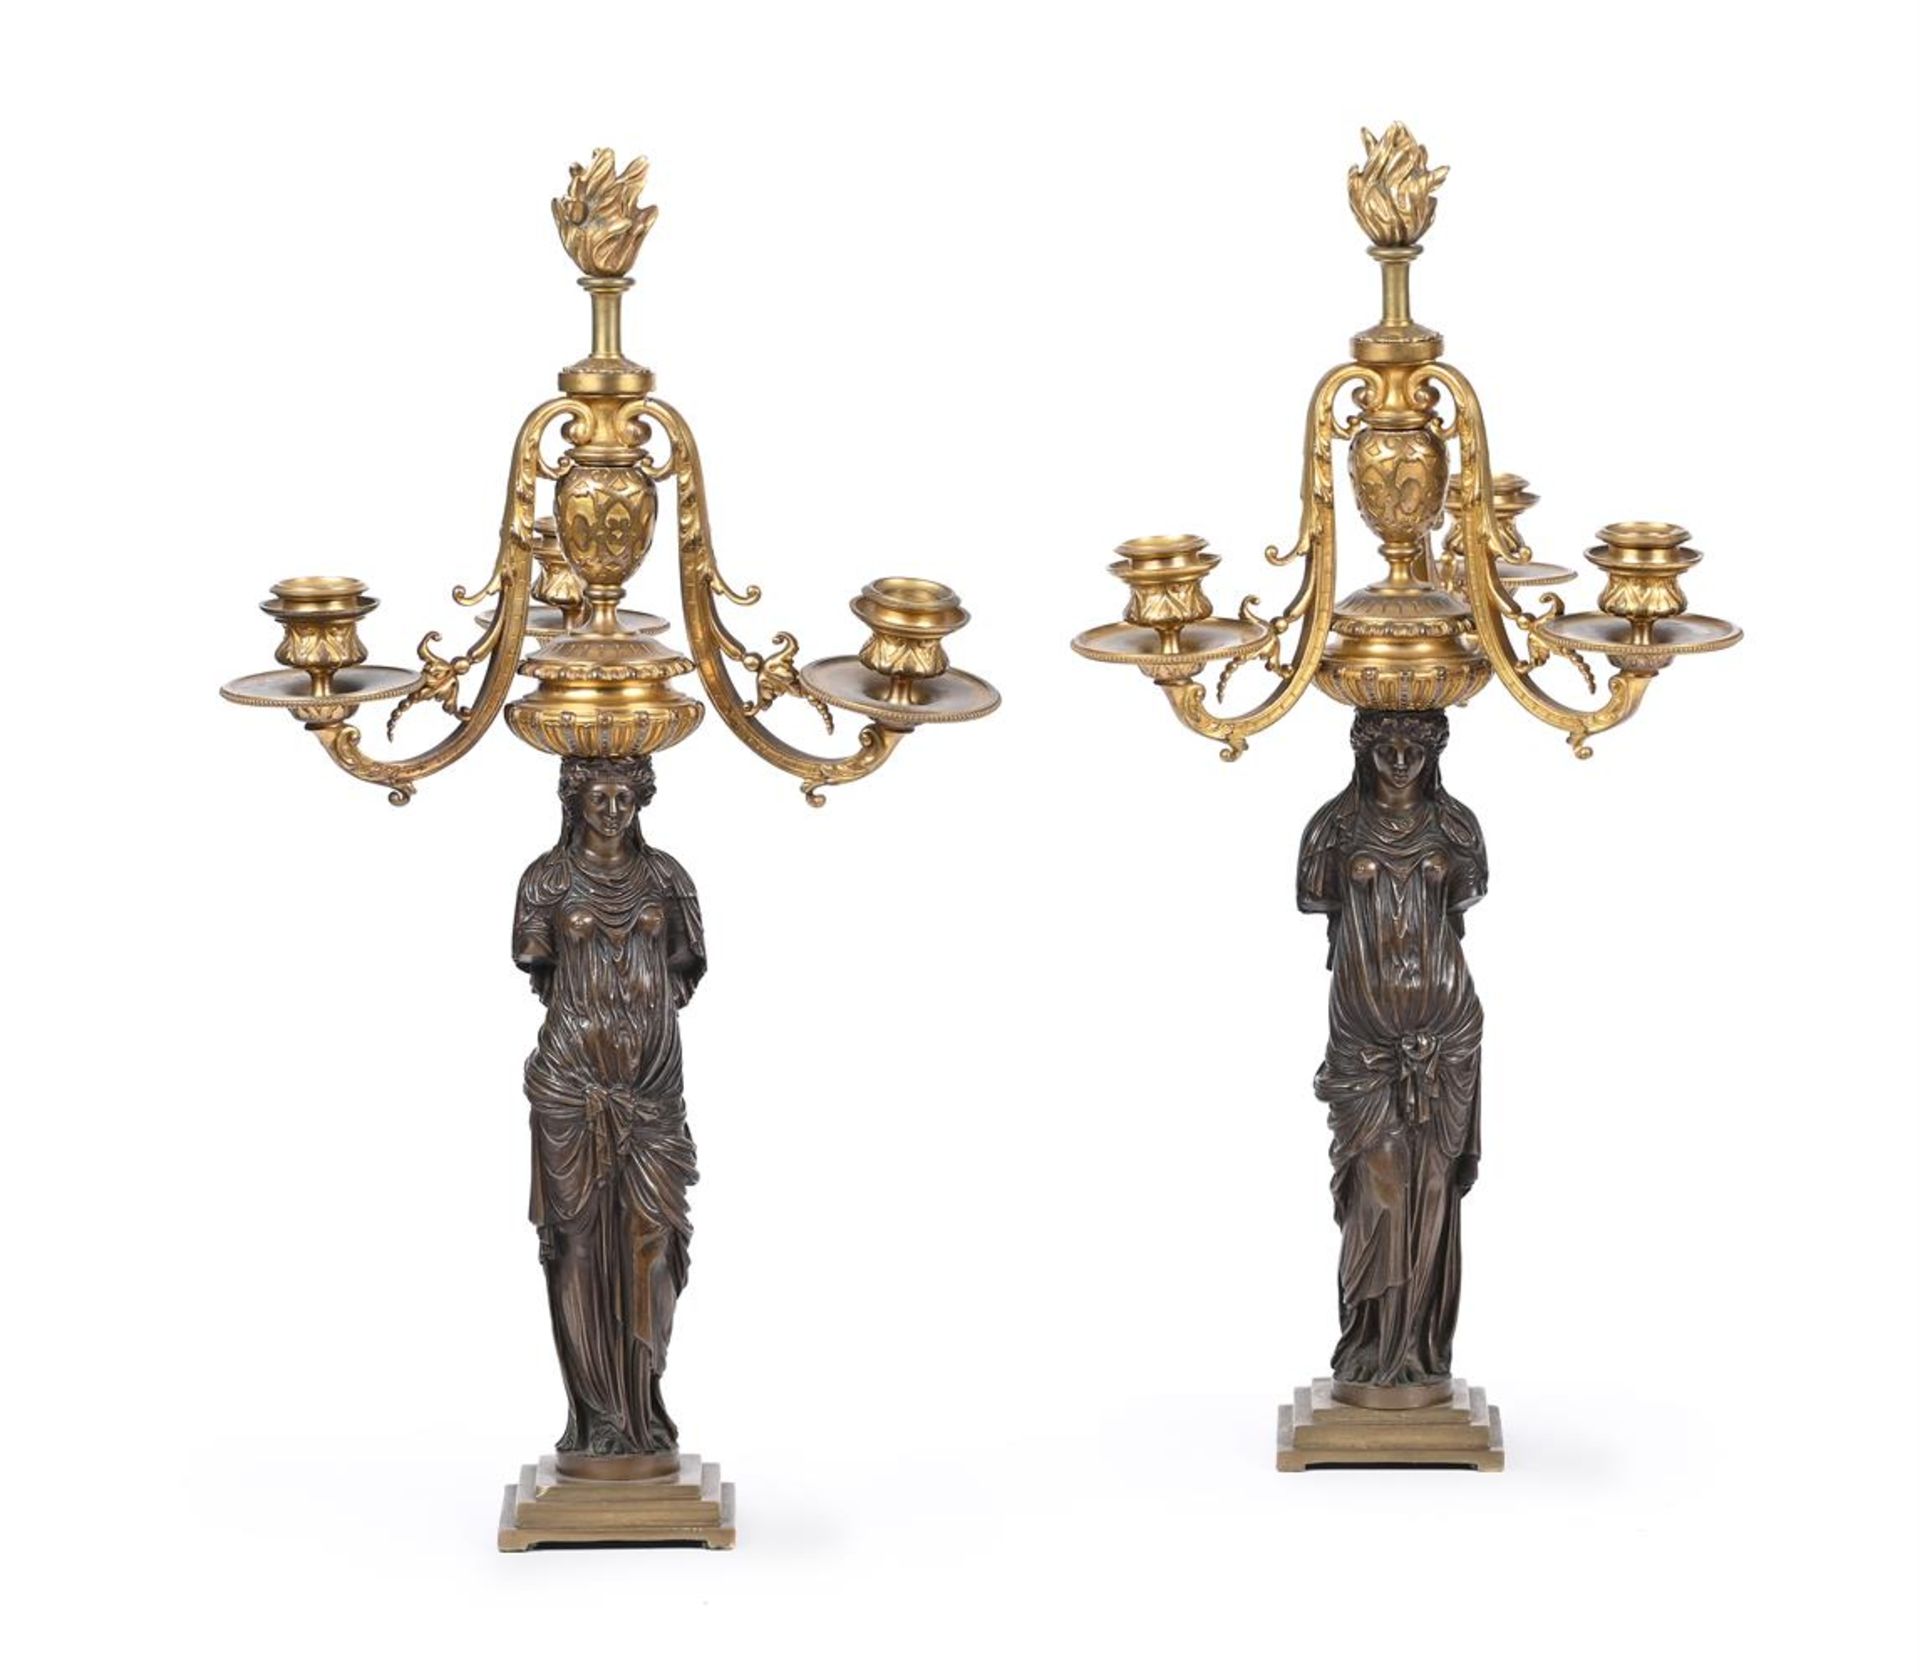 A PAIR OF BARBEDIENNE ORMOLU AND PATINATED BRONZE THREE LIGHT FIGURAL CANDLEABRA, LATE 19TH CENTURY - Image 2 of 4